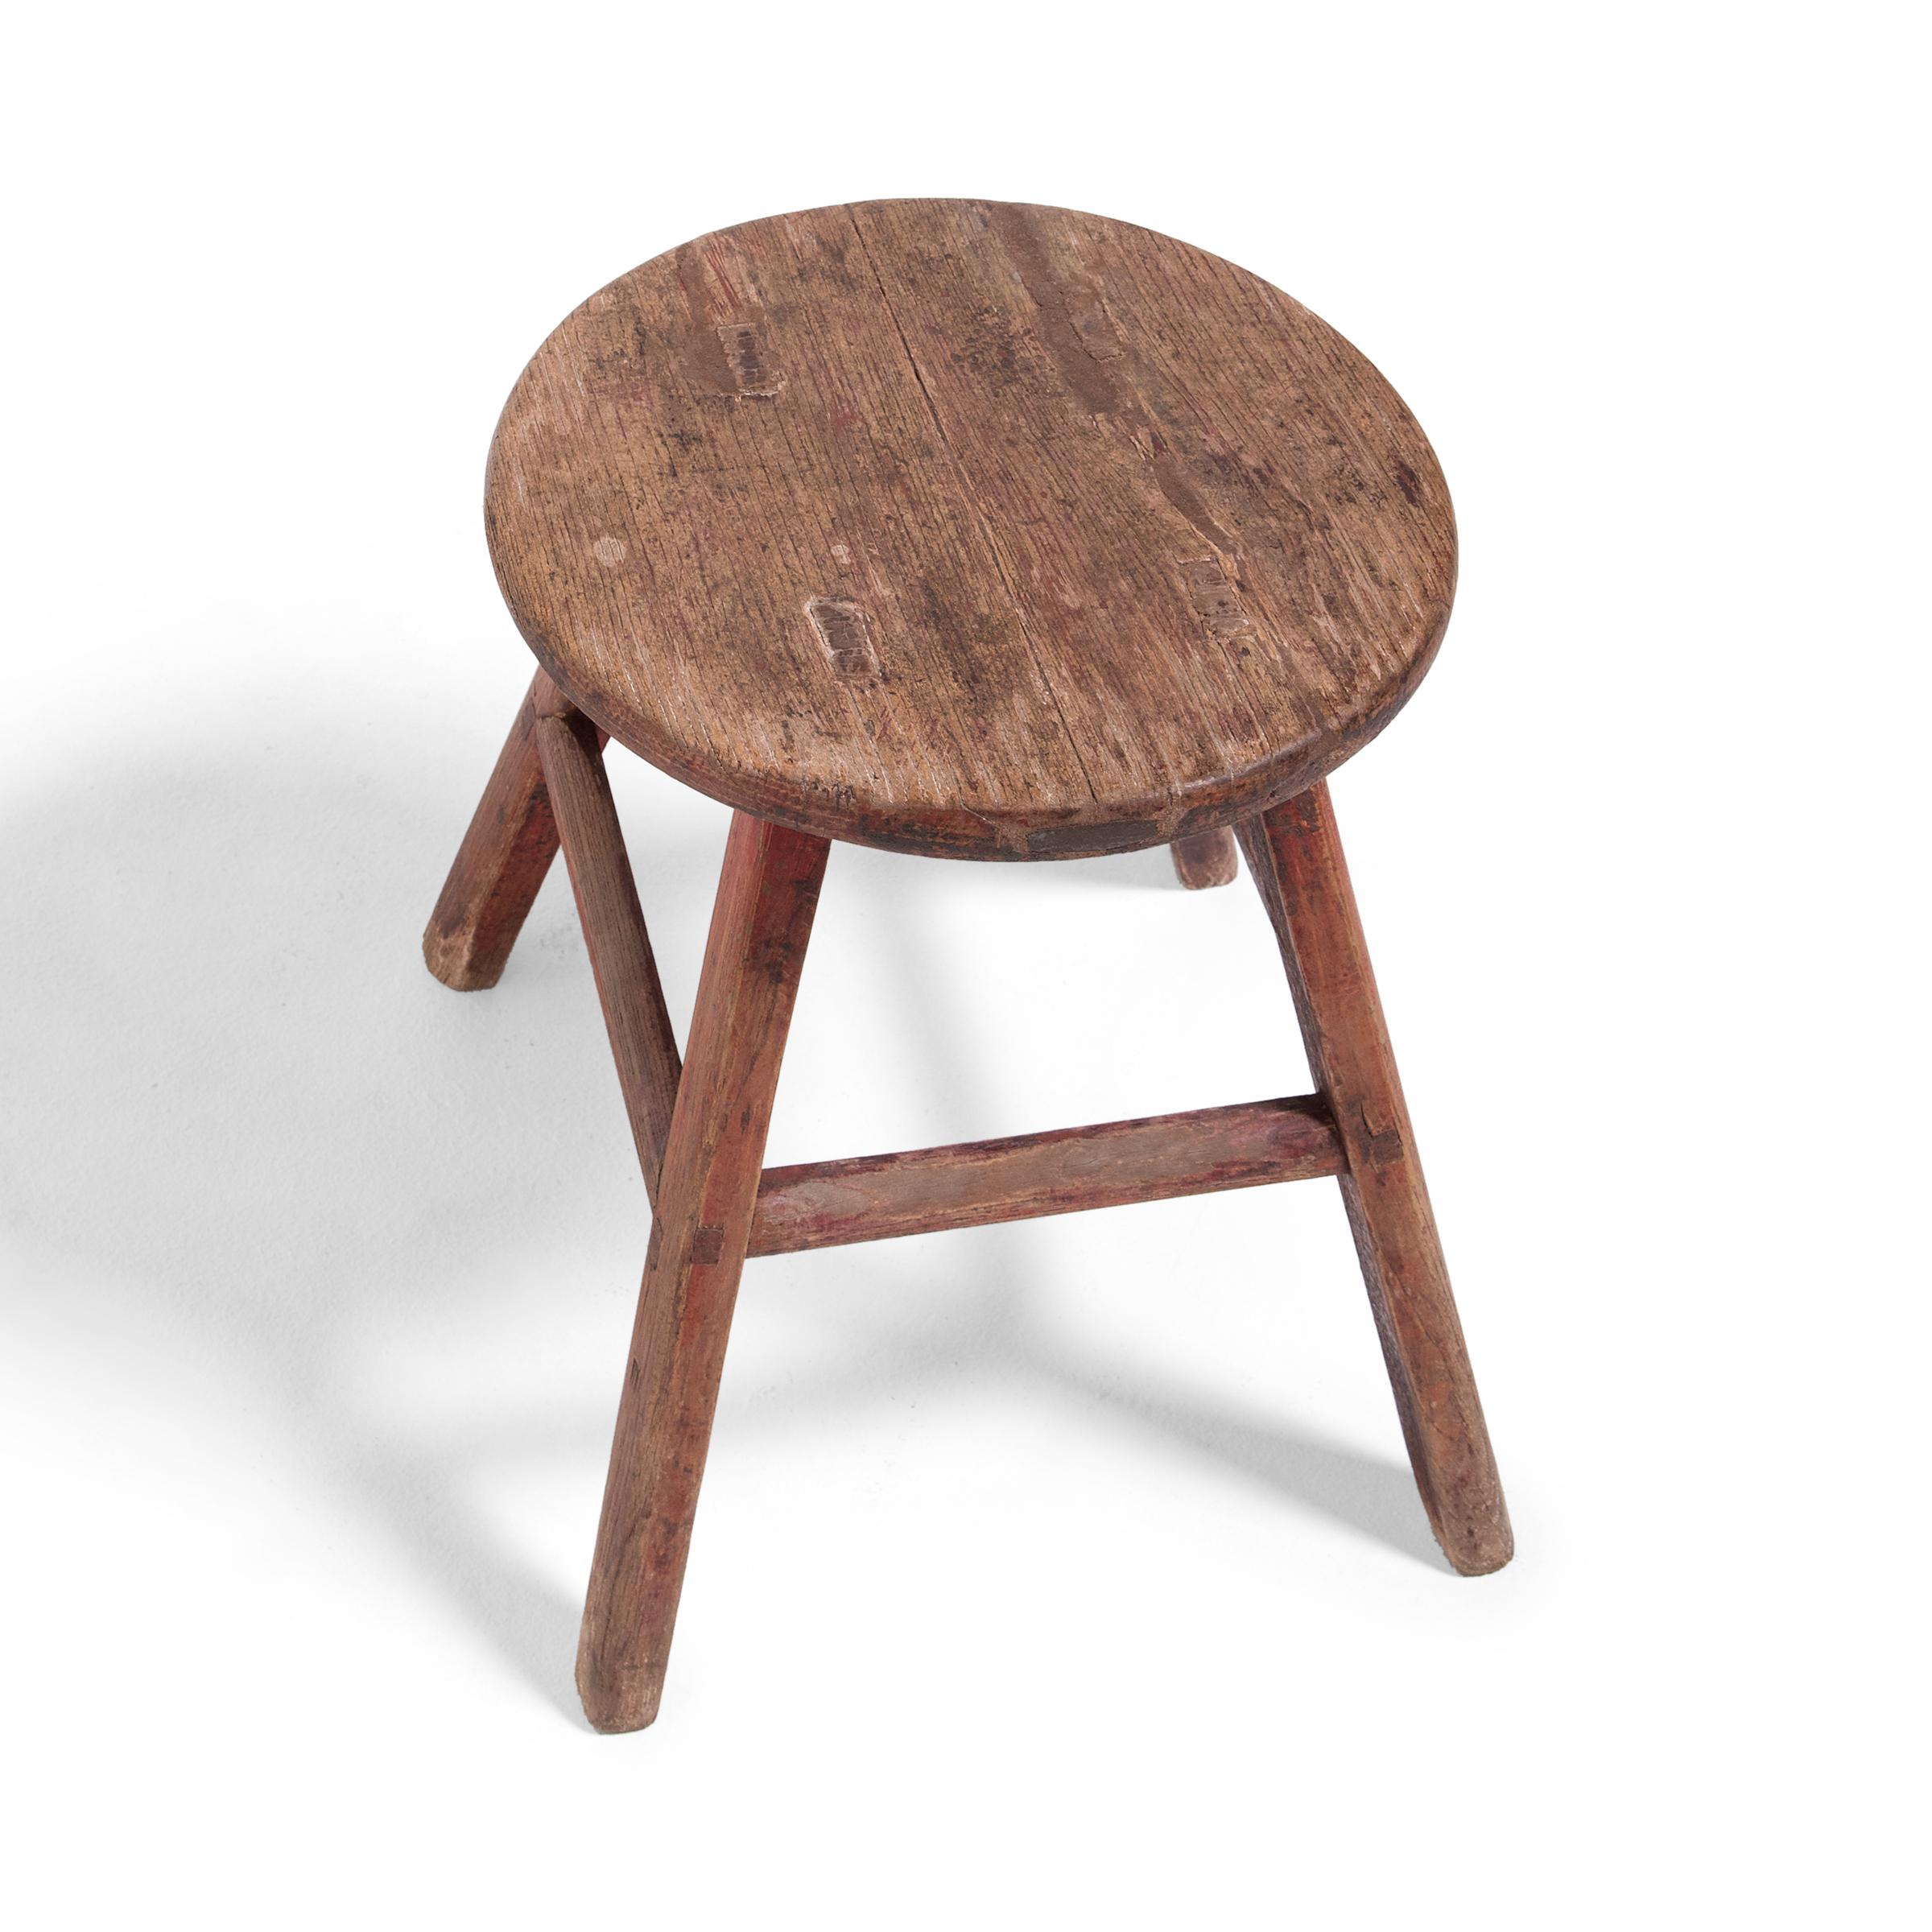 Rustic Chinese Autumn Moon Stool, c. 1900 For Sale